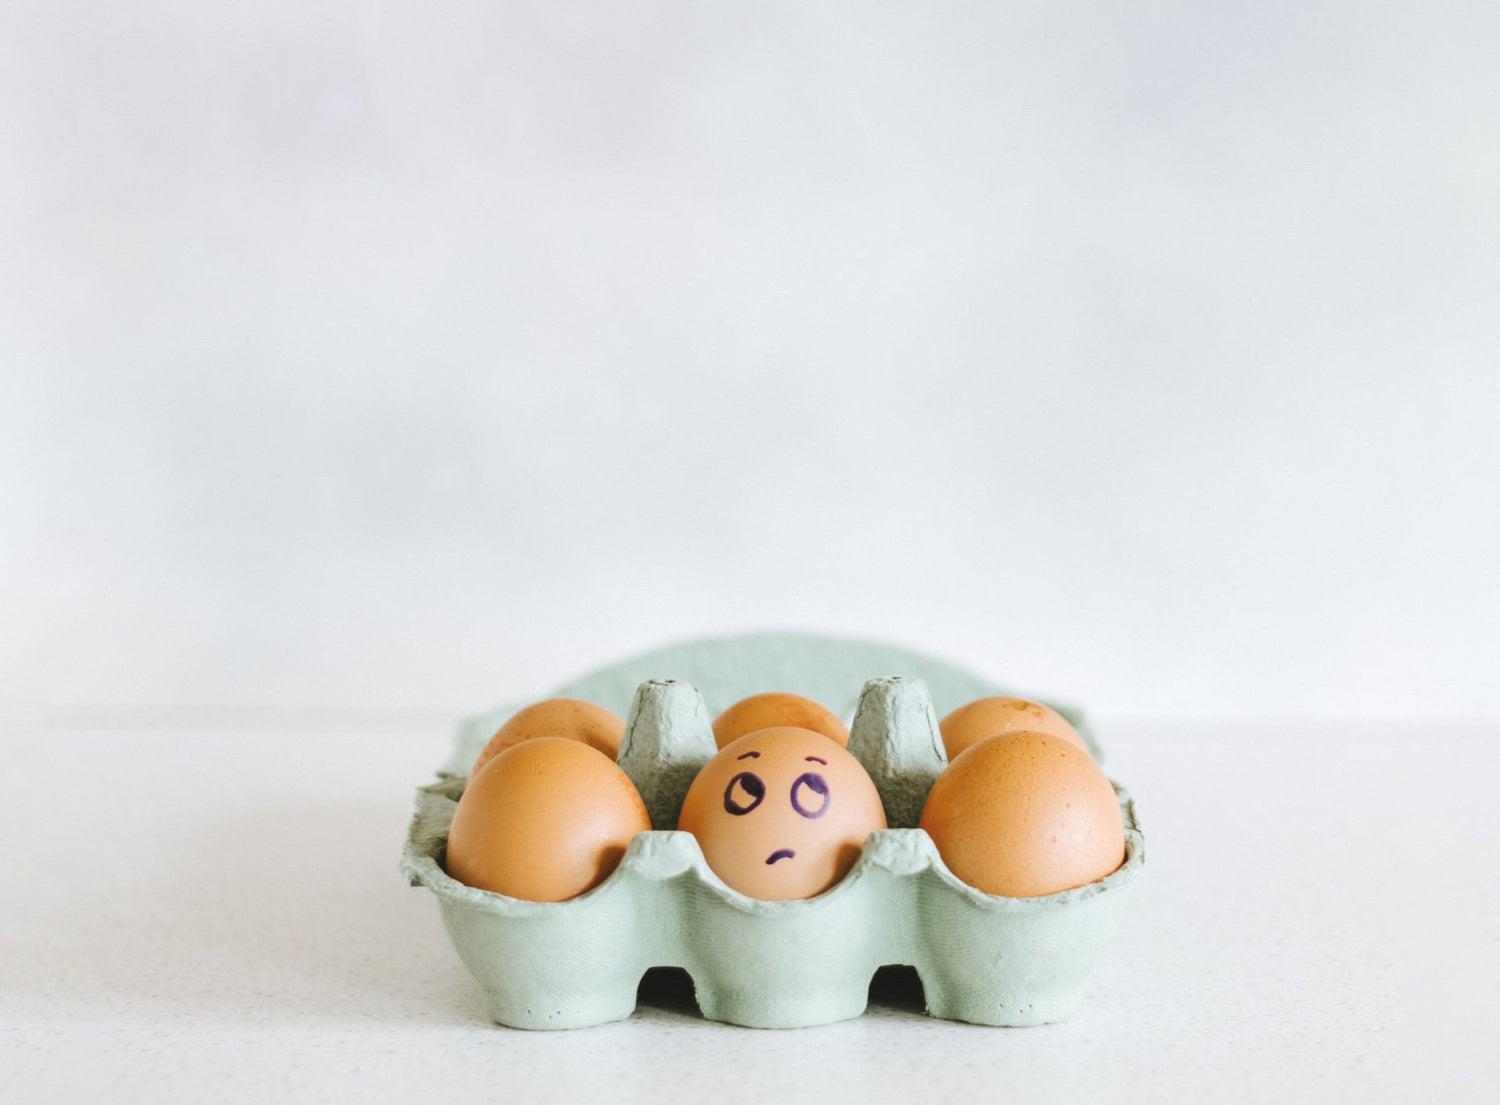 Photo of light aqua-gray 6-egg carton full of brown eggs on an all white background. Middle egg has a skeptical face drawn on the front in sharpie